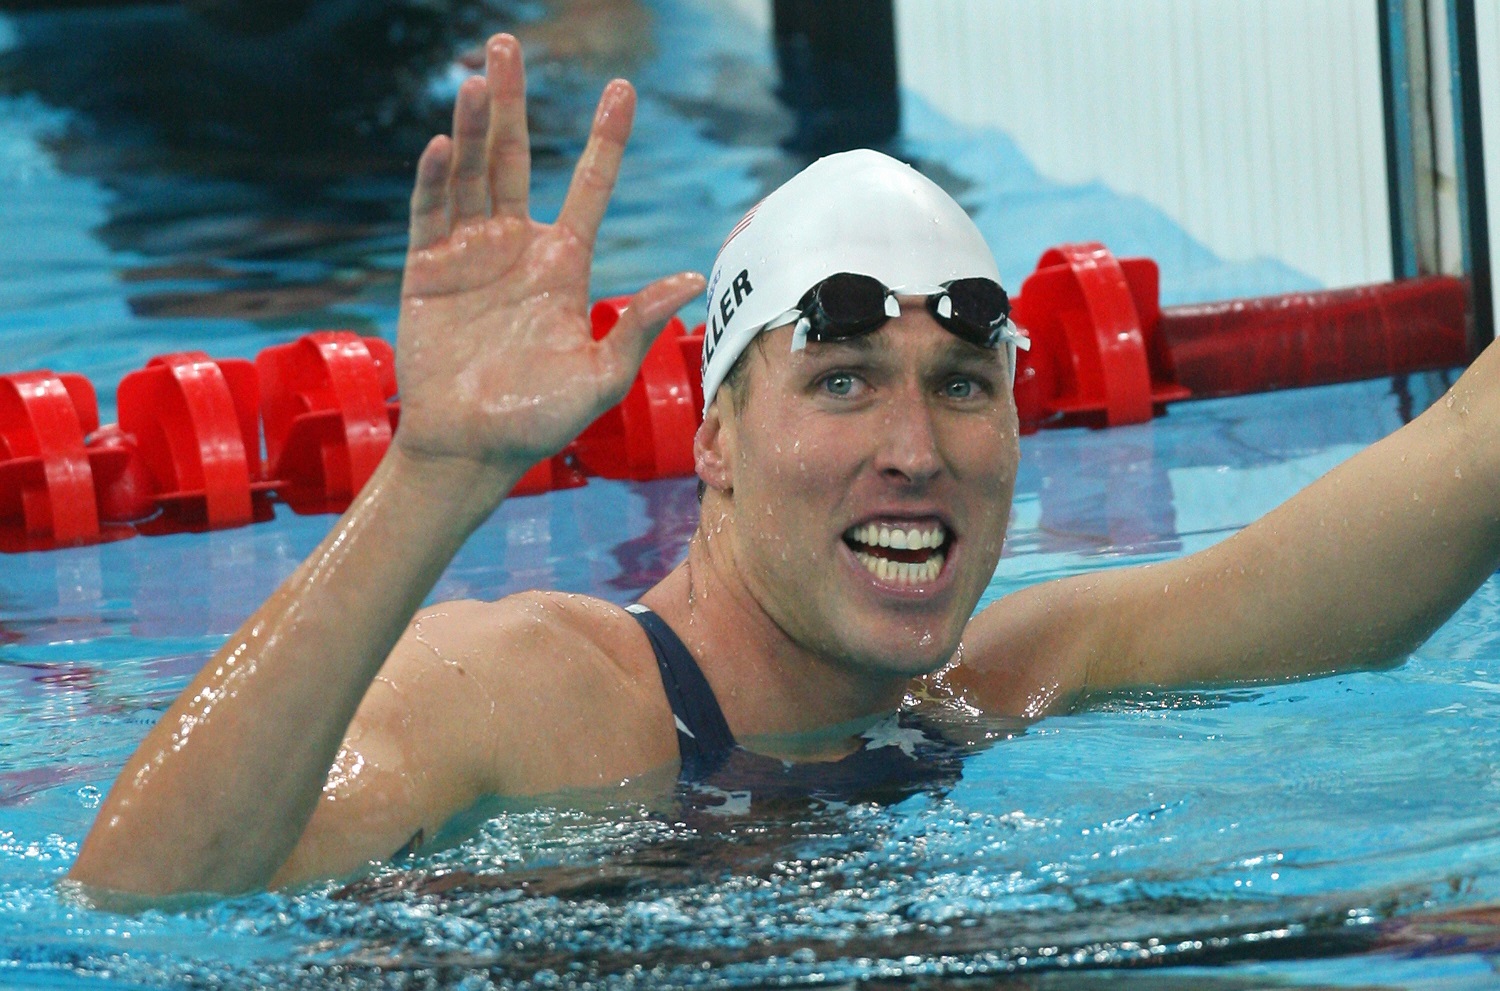 U.S. swimmer Klete Keller reacts to winning the men's 800-meter freestyle relay at the 2008 Beijing Olympic Games